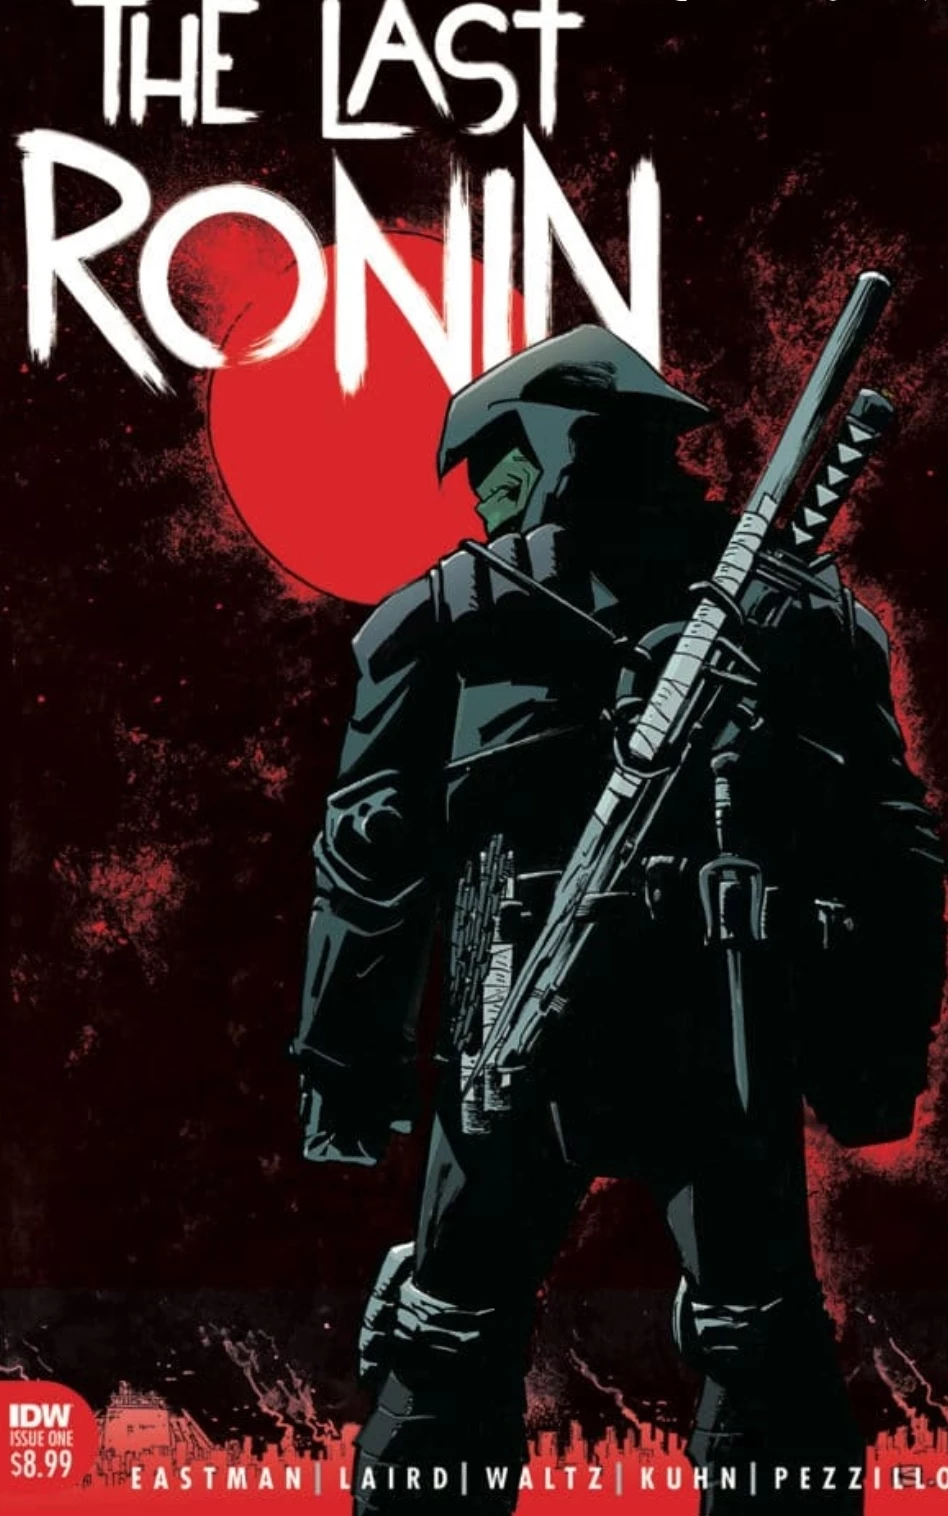 download rise of the ronin game